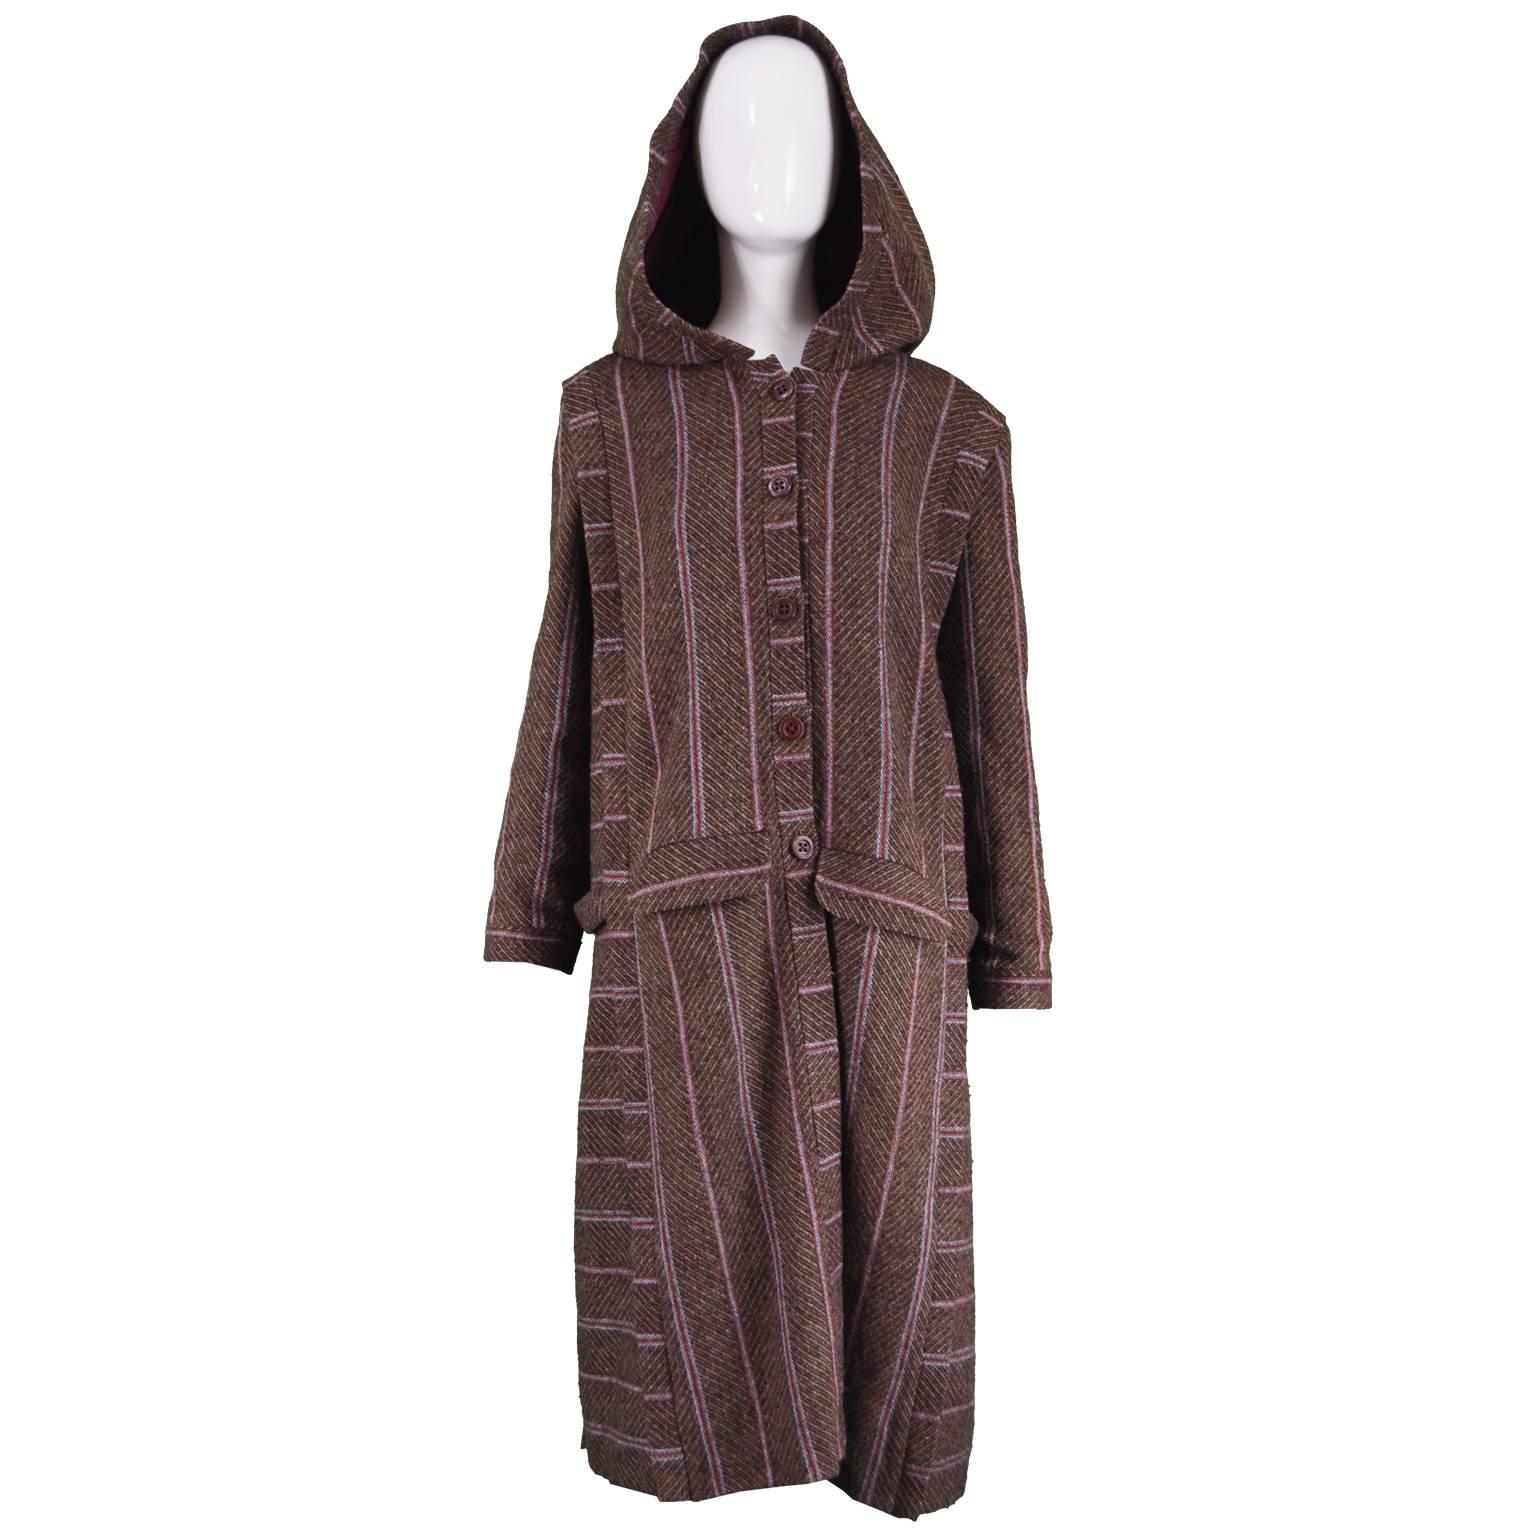 Bill Gibb Dramatic Brown Wool Striped Vintage Coat with Oversized Hood, 1970s